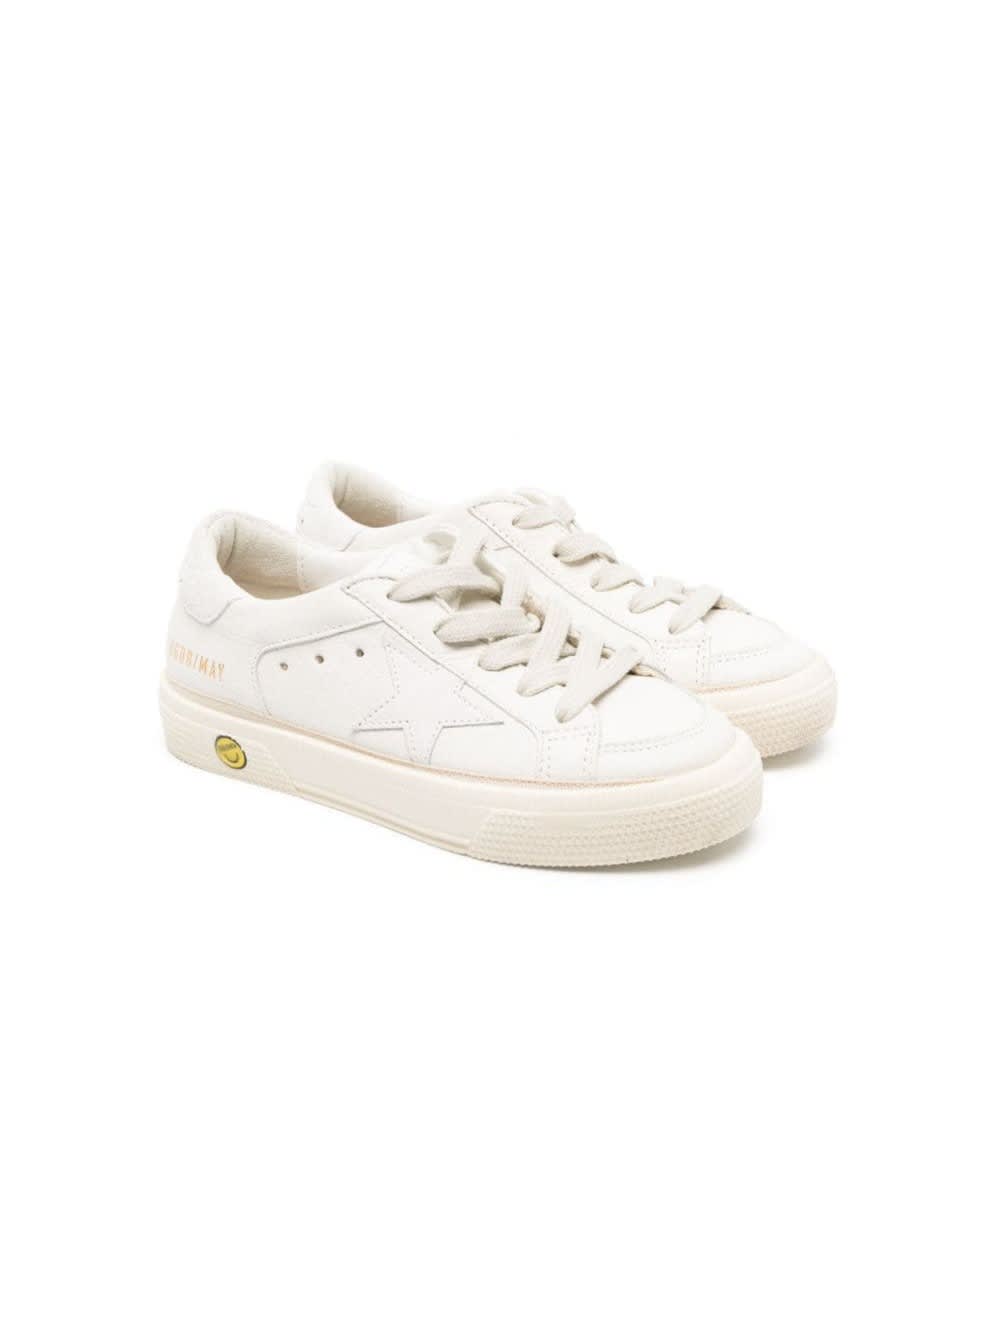 Golden Goose Kids' May Nappa Upper Suede Star And Heel Include Stesso Codice Gyf In White